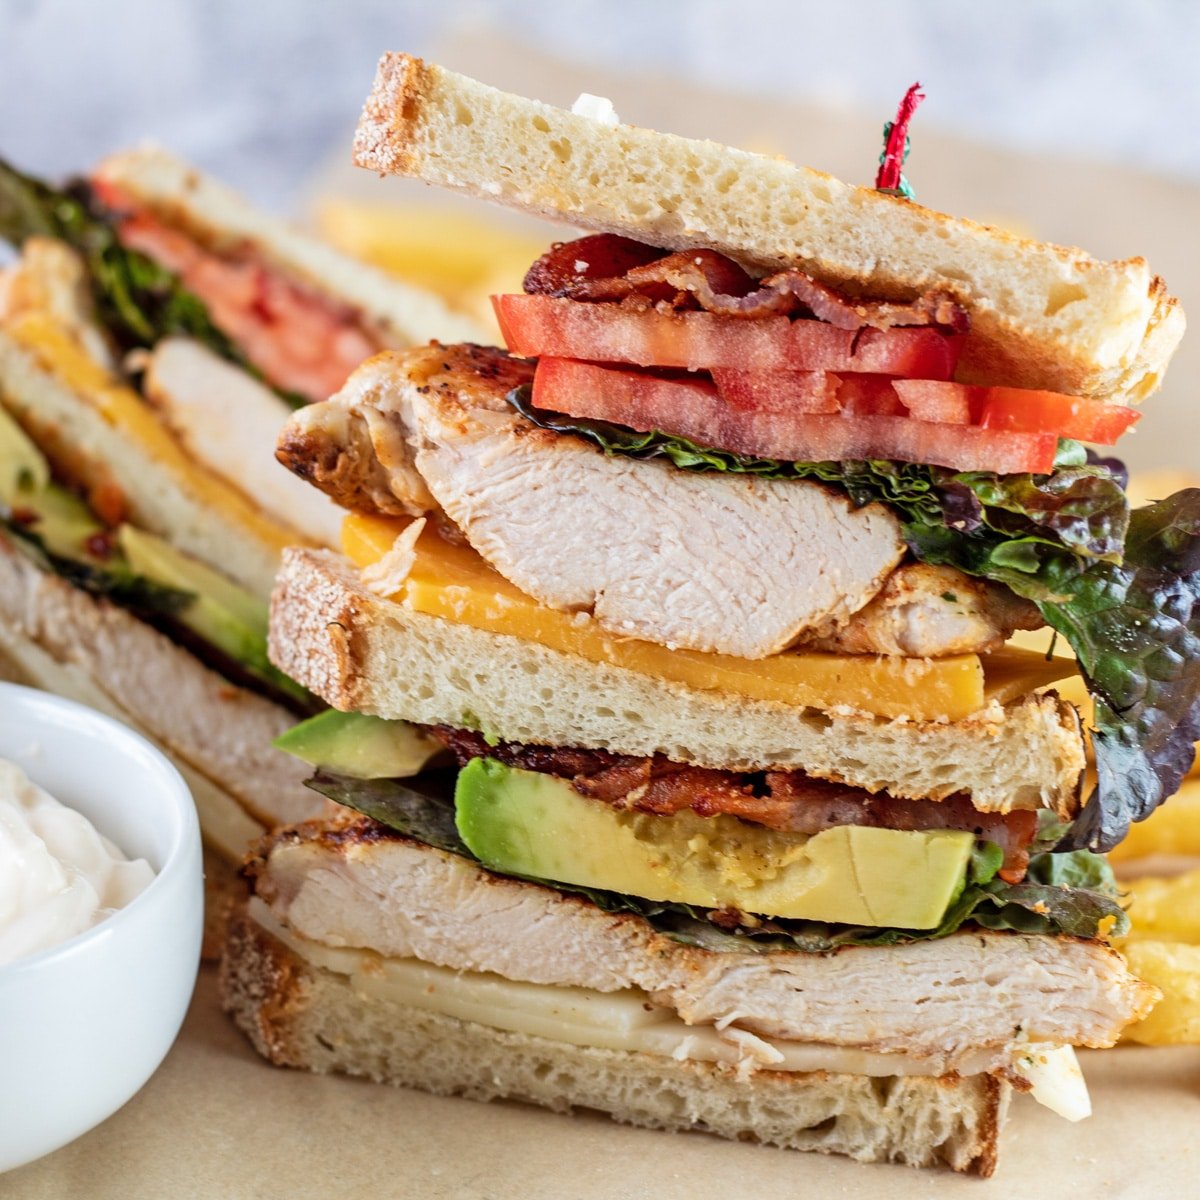 Chicken club sandwich with fries on a parchment.